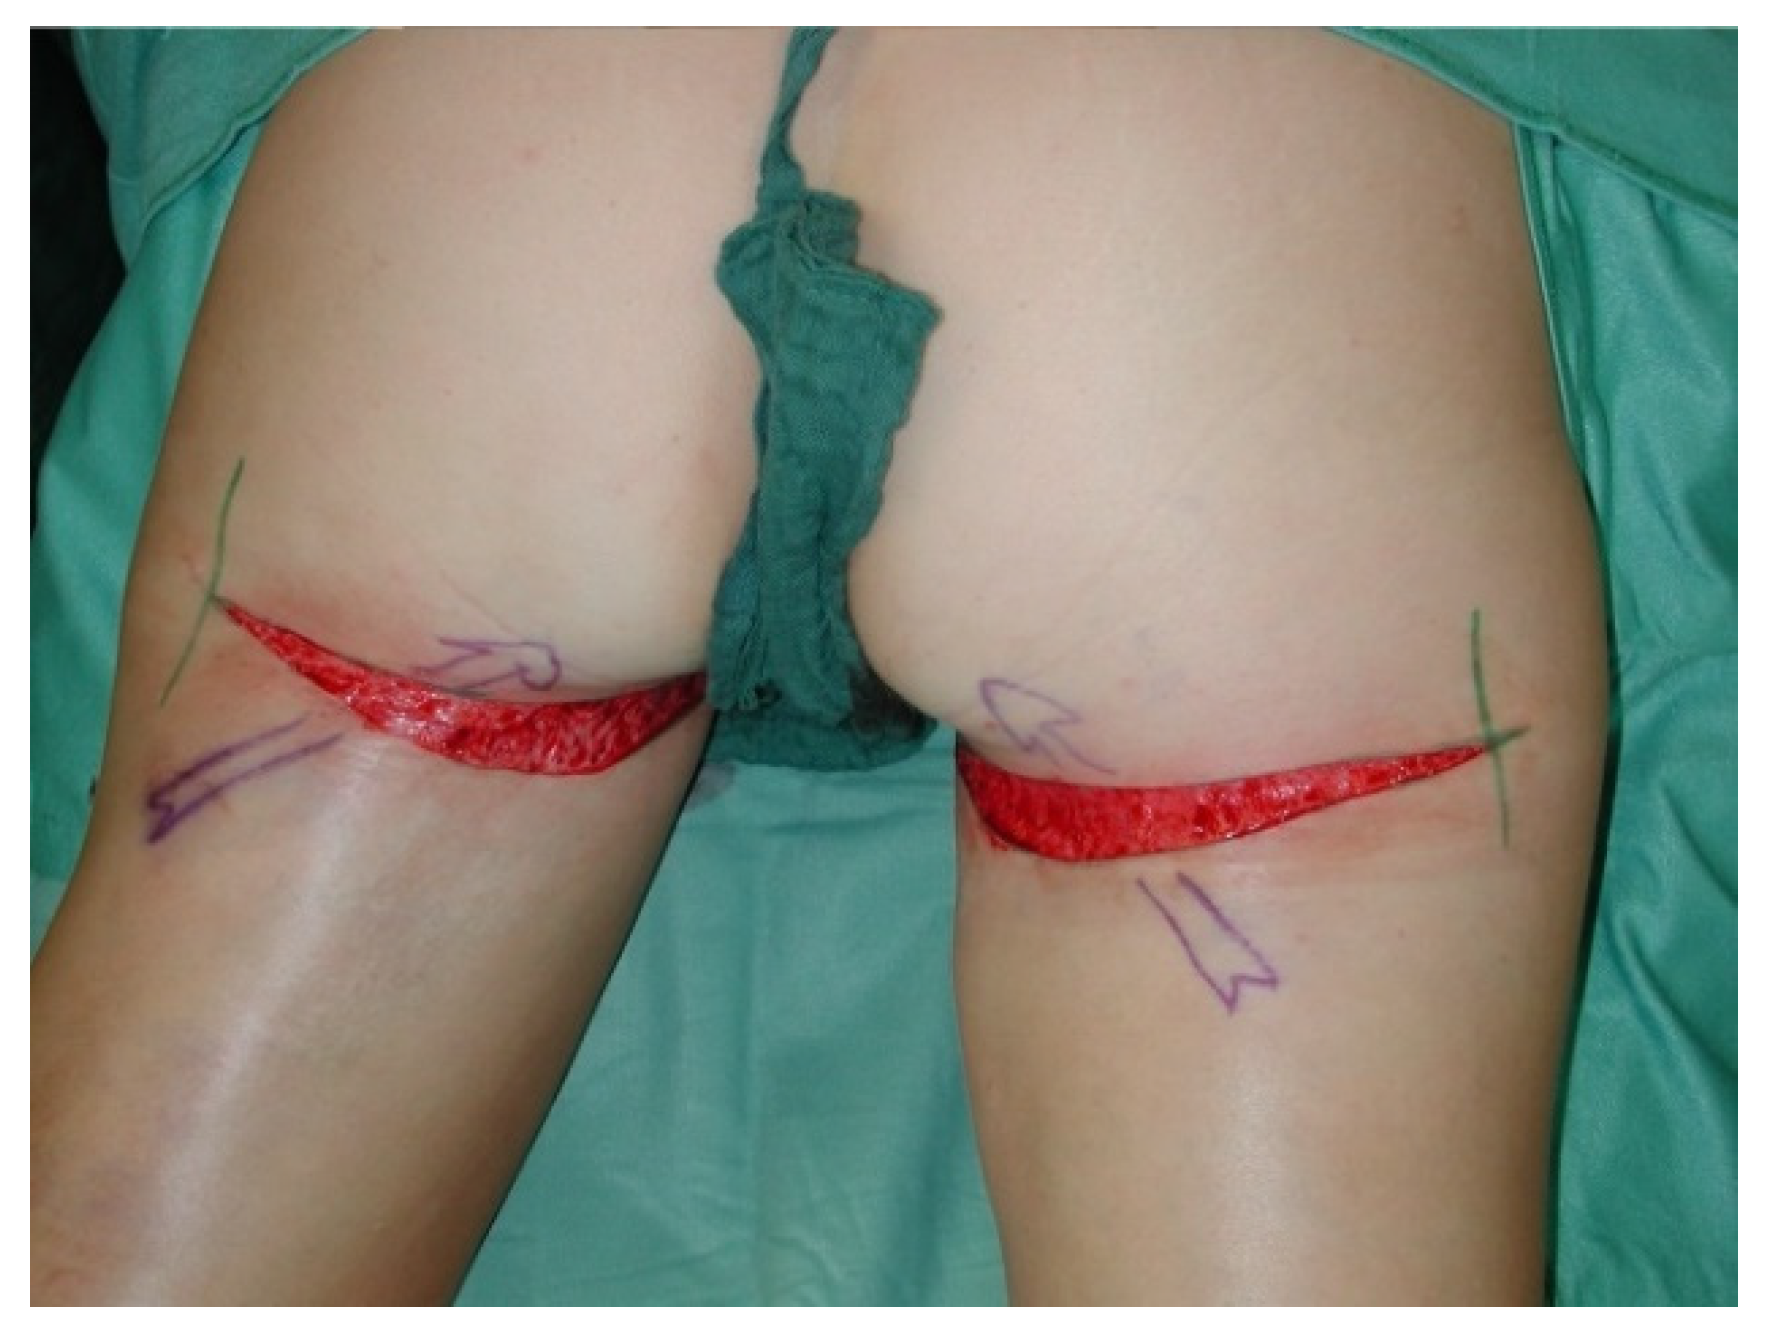 Thigh scar in breast reconstruction surgery - Stock Image - C038/2383 -  Science Photo Library